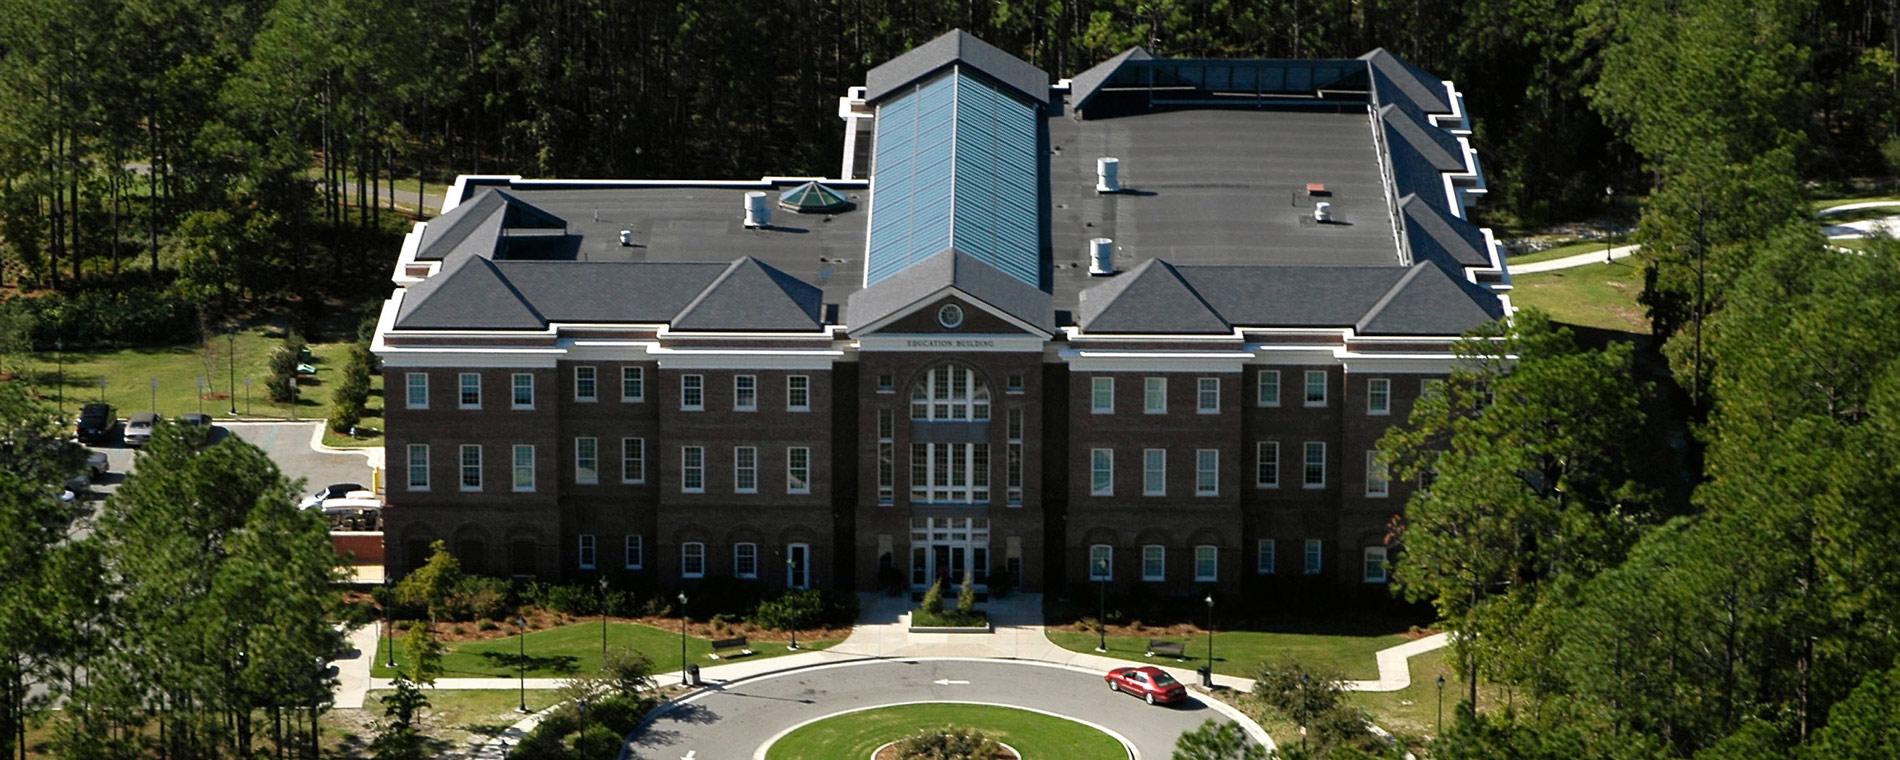 exterior aerial view of Watson college